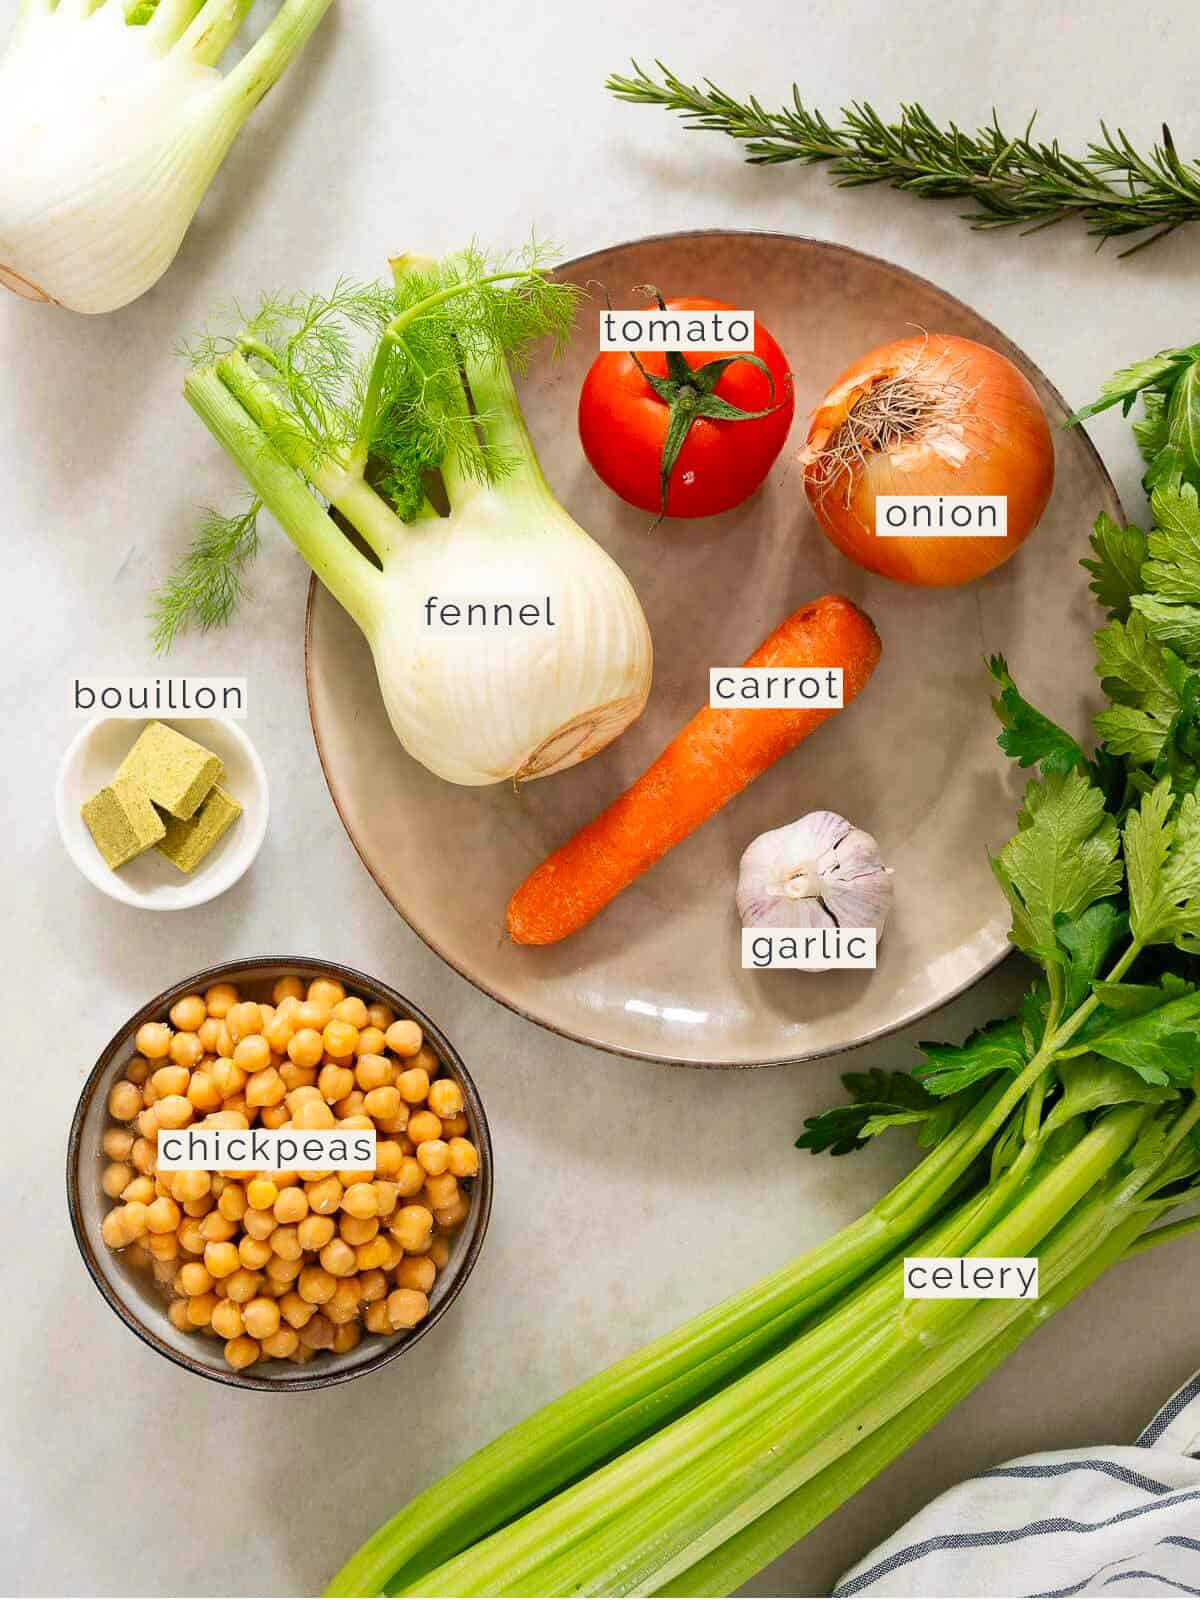 labeled ingredients to make a fennel soup with chickpeas.